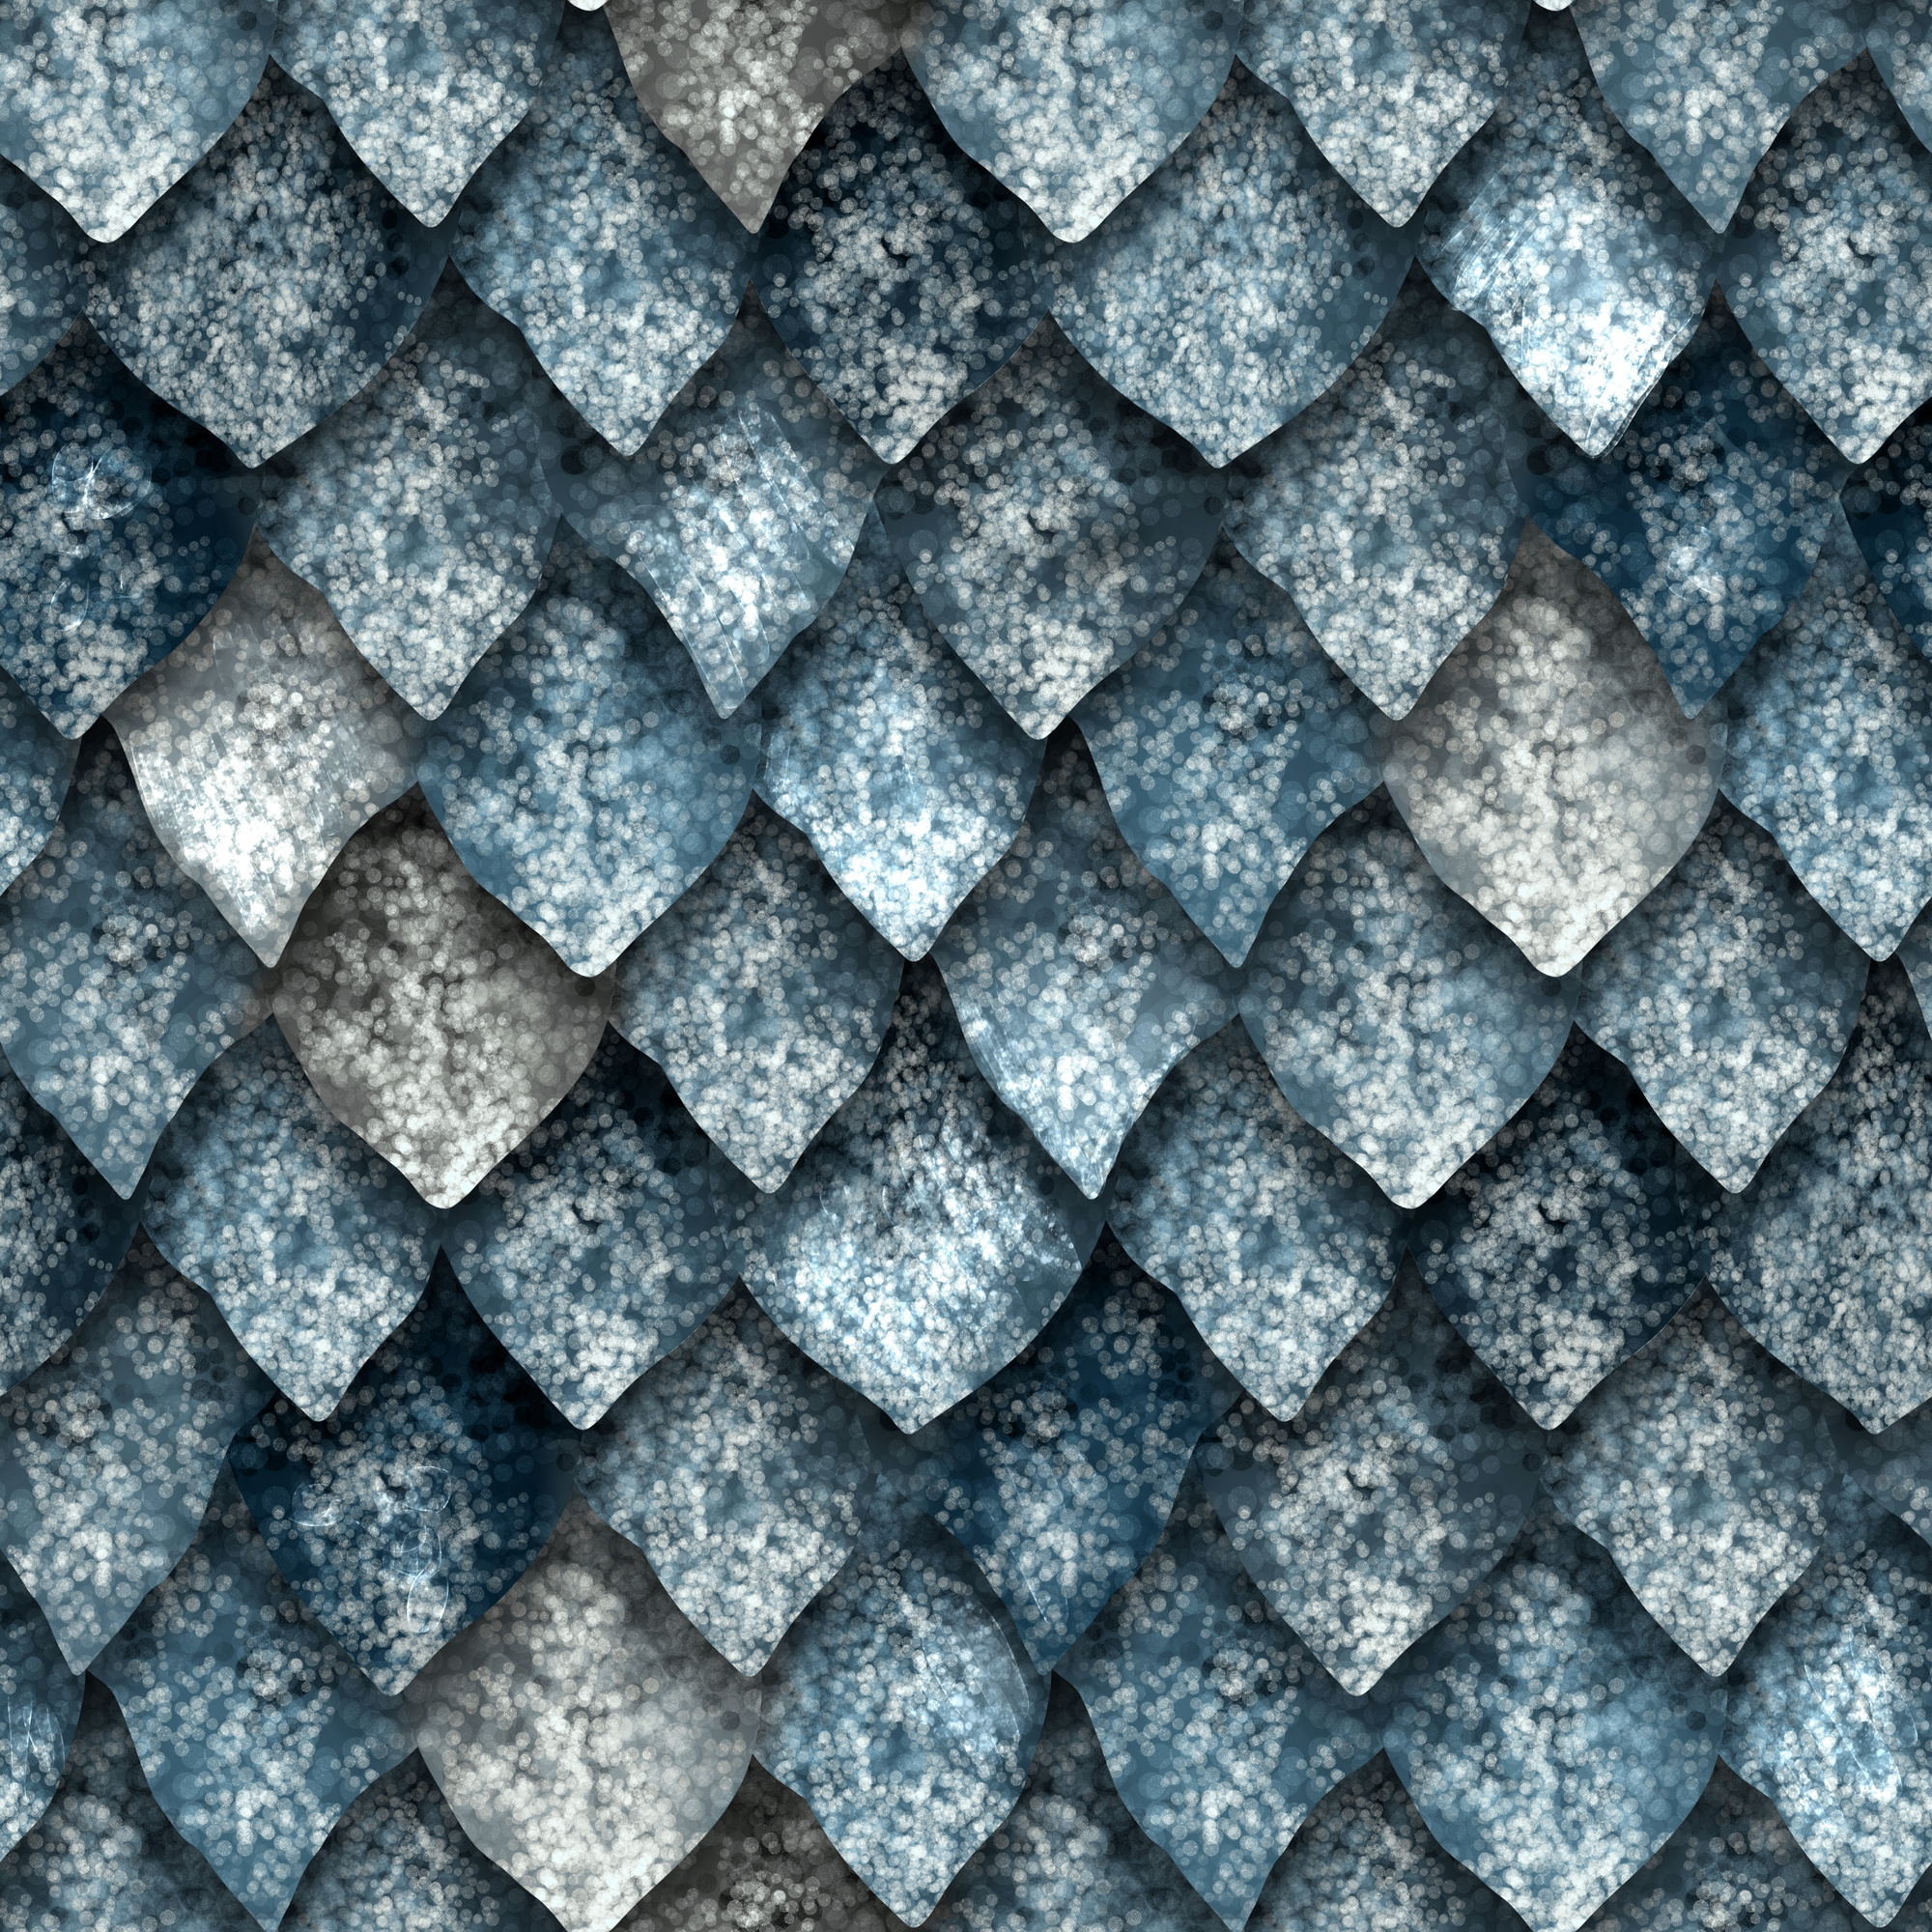 Seamless Texture of Dragon Scales, Reptile Skin